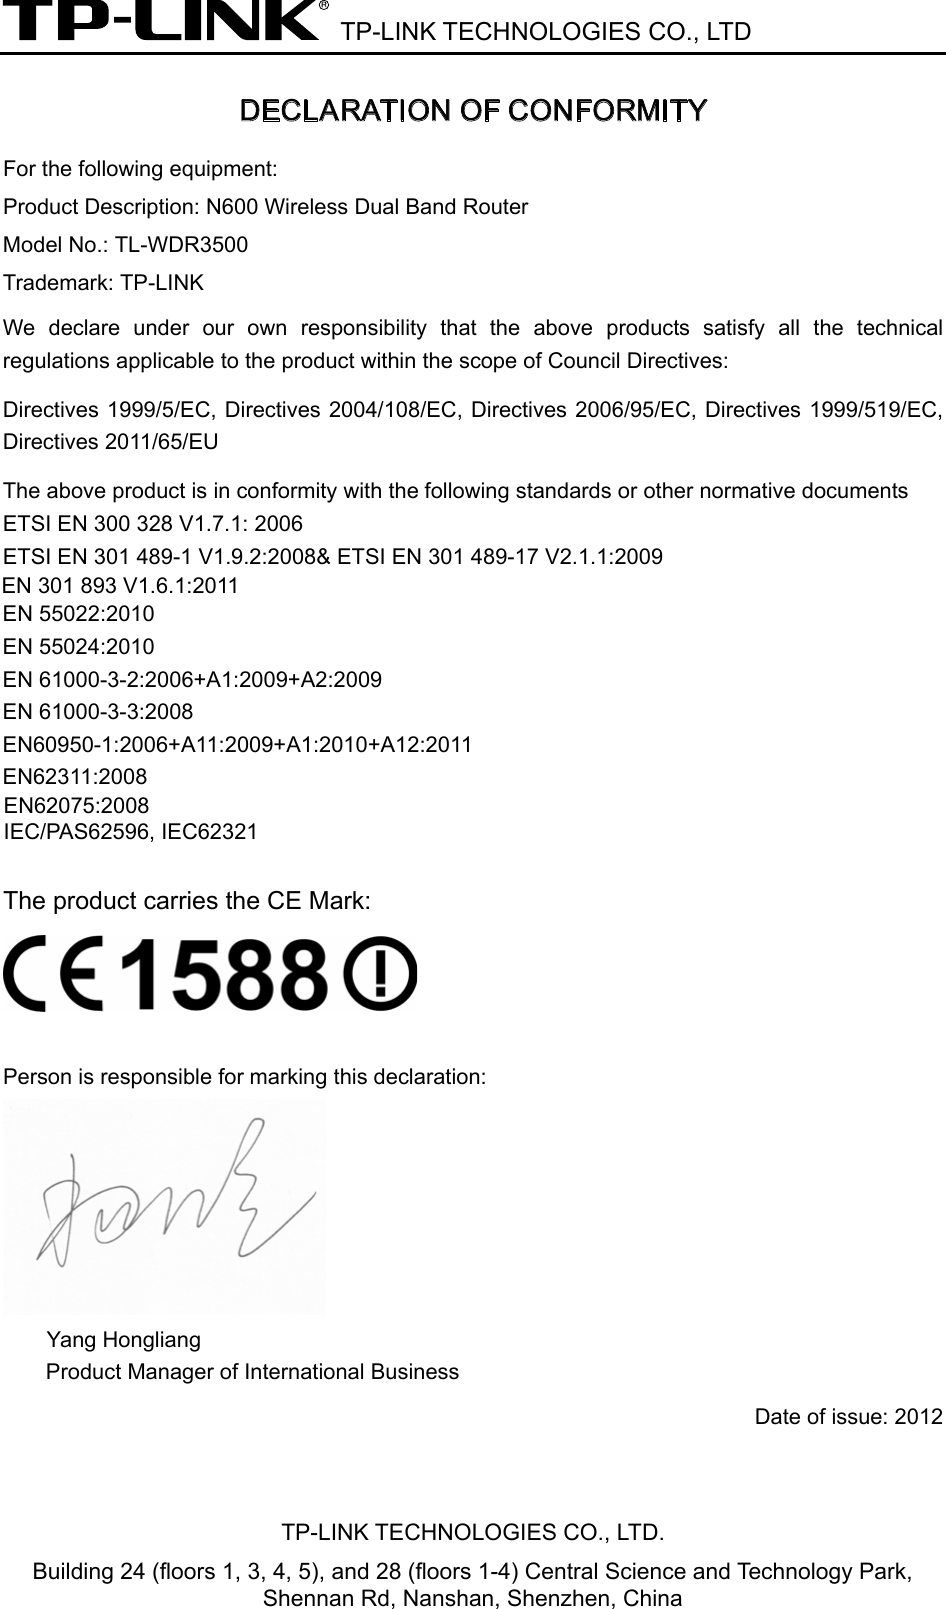  TP-LINK TECHNOLOGIES CO., LTD DECLARATION OF CONFORMITY For the following equipment: Product Description: N600 Wireless Dual Band Router  Model No.: TL-WDR3500 Trademark: TP-LINK We  declare under our own responsibility  that  the  above  products  satisfy  all  the  technical regulations applicable to the product within the scope of Council Directives:     Directives 1999/5/EC, Directives 2004/108/EC, Directives 2006/95/EC, Directives 1999/519/EC, Directives 2011/65/EU The above product is in conformity with the following standards or other normative documents ETSI EN 300 328 V1.7.1: 2006 ETSI EN 301 489-1 V1.9.2:2008&amp; ETSI EN 301 489-17 V2.1.1:2009 EN 55022:2010 EN 55024:2010 EN 61000-3-2:2006+A1:2009+A2:2009 EN 61000-3-3:2008 EN60950-1:2006+A11:2009+A1:2010+A12:2011 EN62311:2008  The product carries the CE Mark:   Person is responsible for marking this declaration:  Yang Hongliang Product Manager of International Business   Date of issue: 2012 TP-LINK TECHNOLOGIES CO., LTD. Building 24 (floors 1, 3, 4, 5), and 28 (floors 1-4) Central Science and Technology Park, Shennan Rd, Nanshan, Shenzhen, China EN 301 893 V1.6.1:2011EN62075:2008IEC/PAS62596, IEC62321